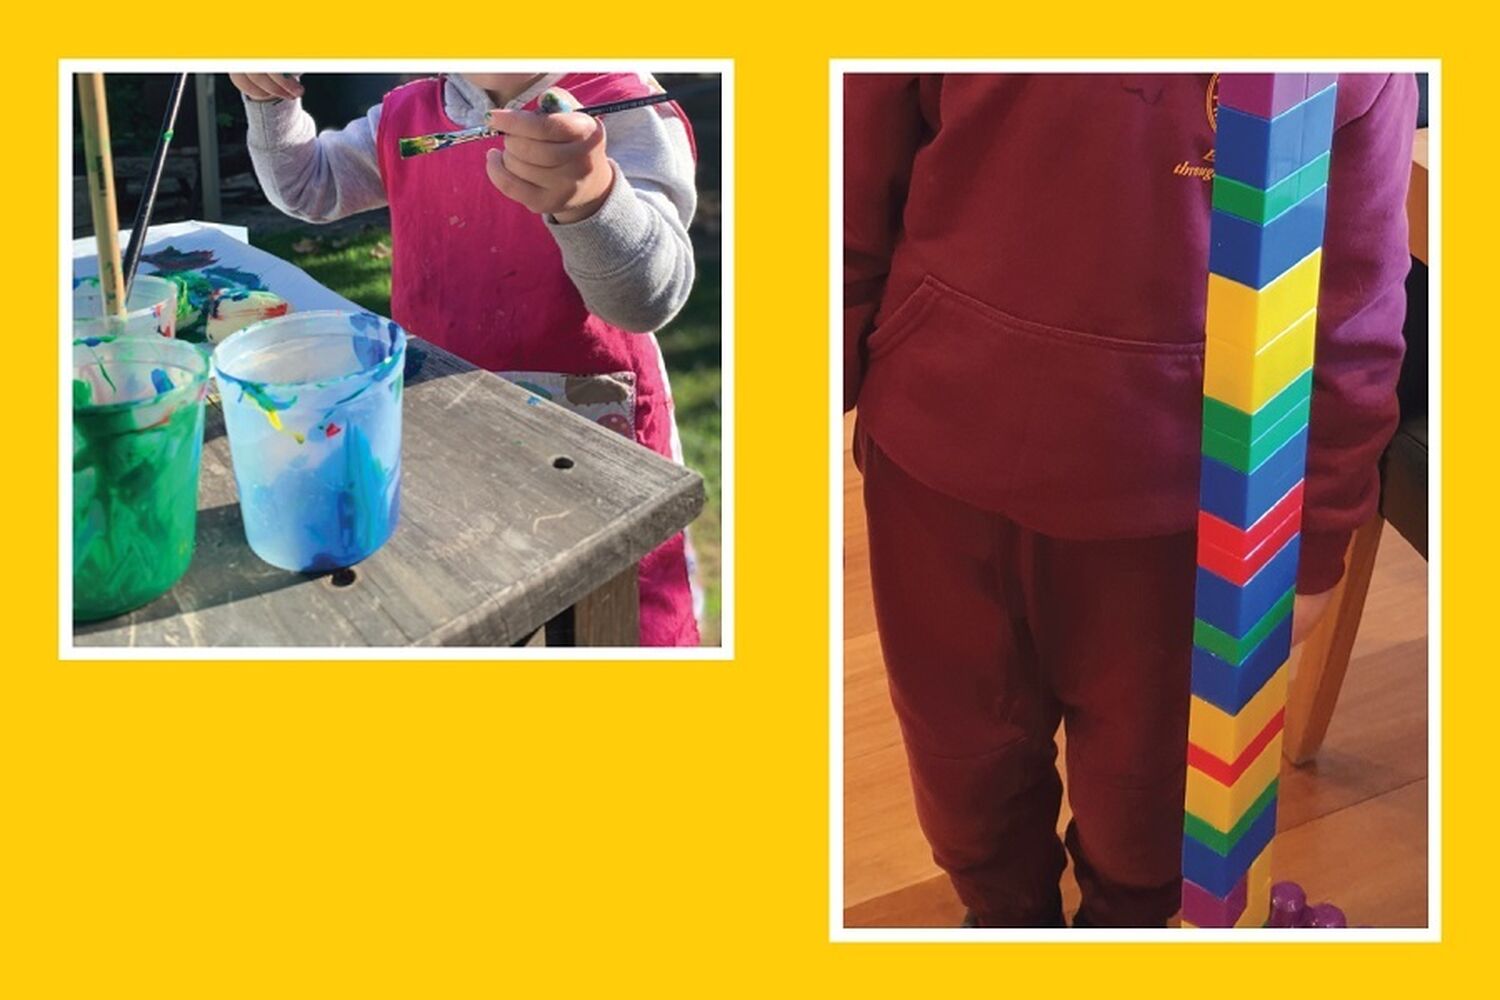 Covid Challenge Painting And Playing With Colourful Lego